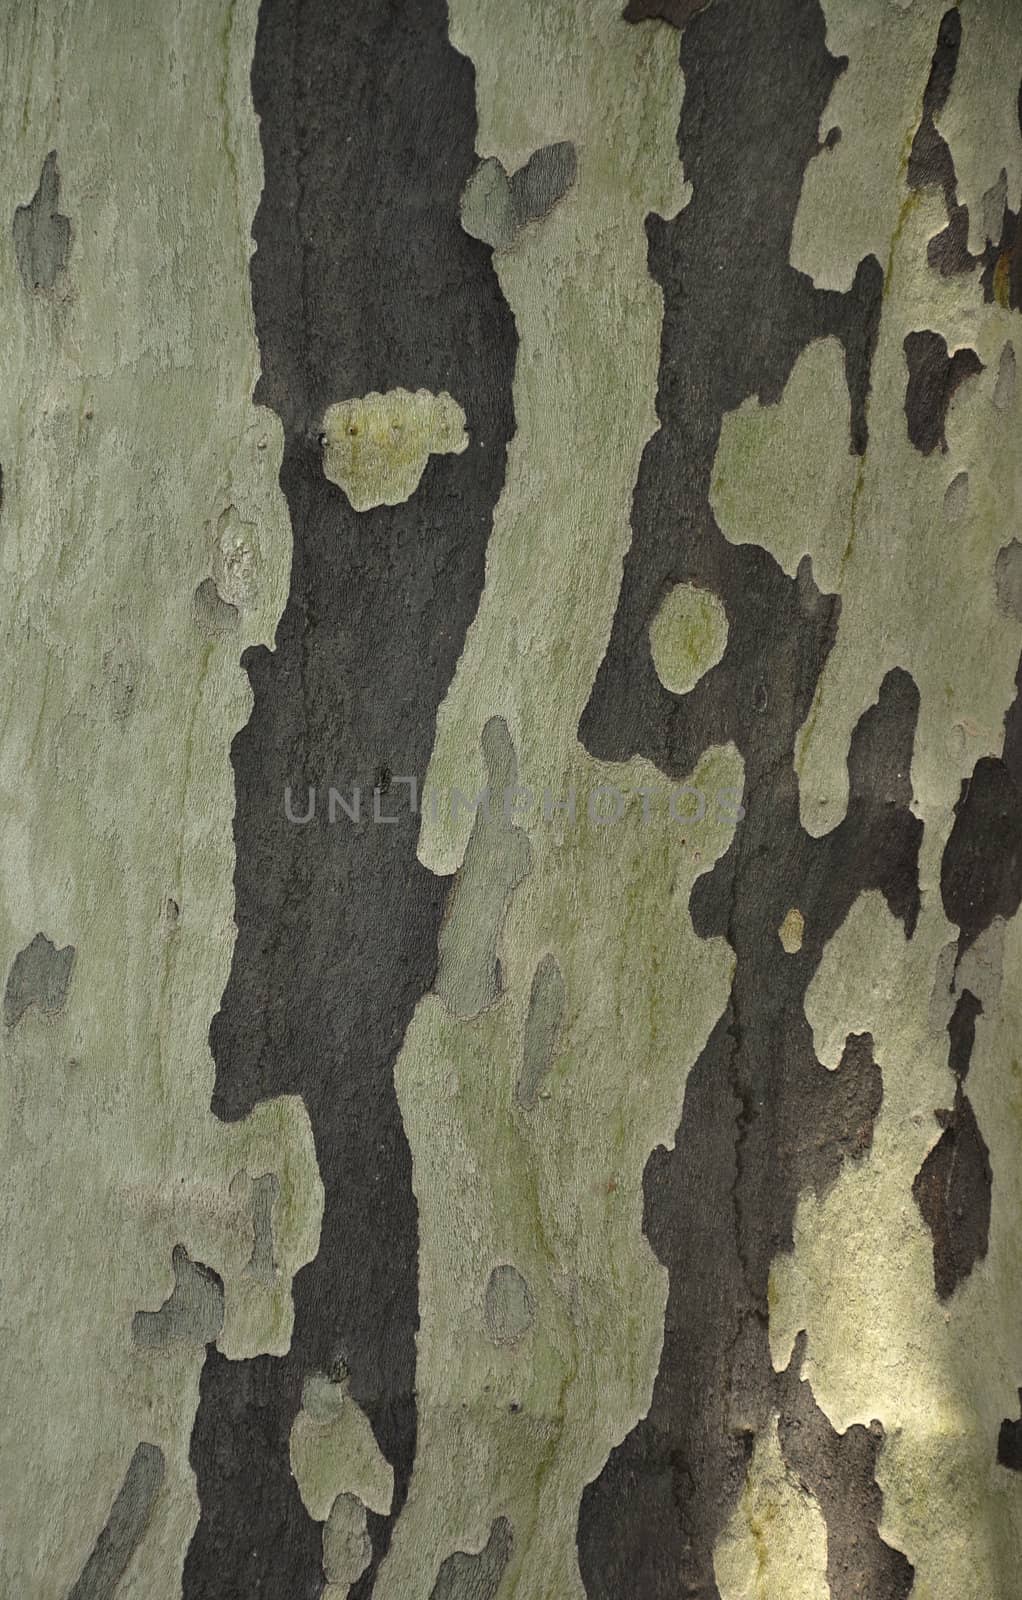 The Artistic Bark of a Tree